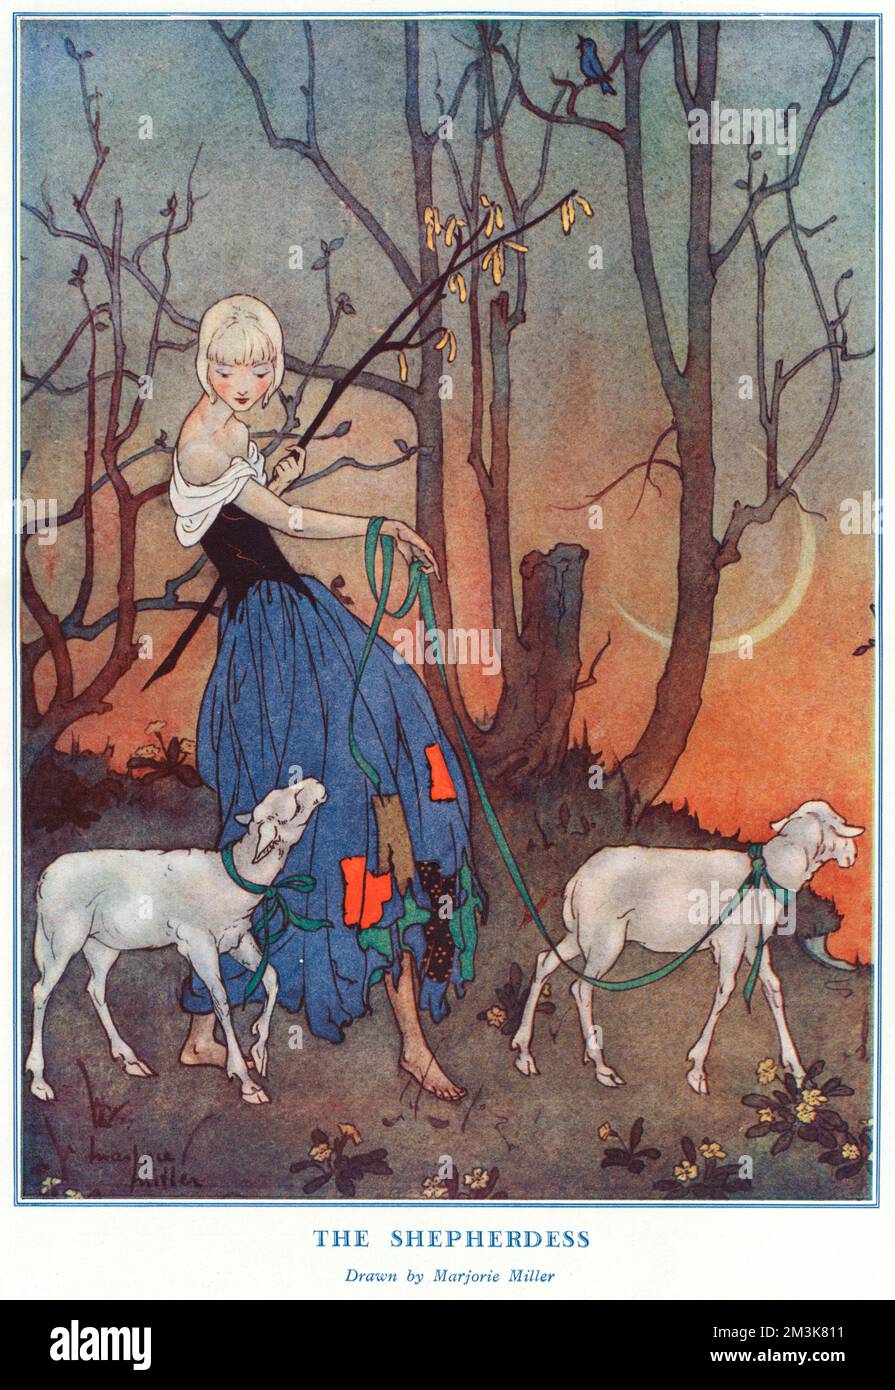 Reminiscent of a Little Bo-Peep, determined never to lose her sheep, this shepherdess has looped ribbons around her charges and garlanded them to her wrist. A bird sings at dawn as the sun rises and the crescent moon descends.     Date:  1927 Stock Photo